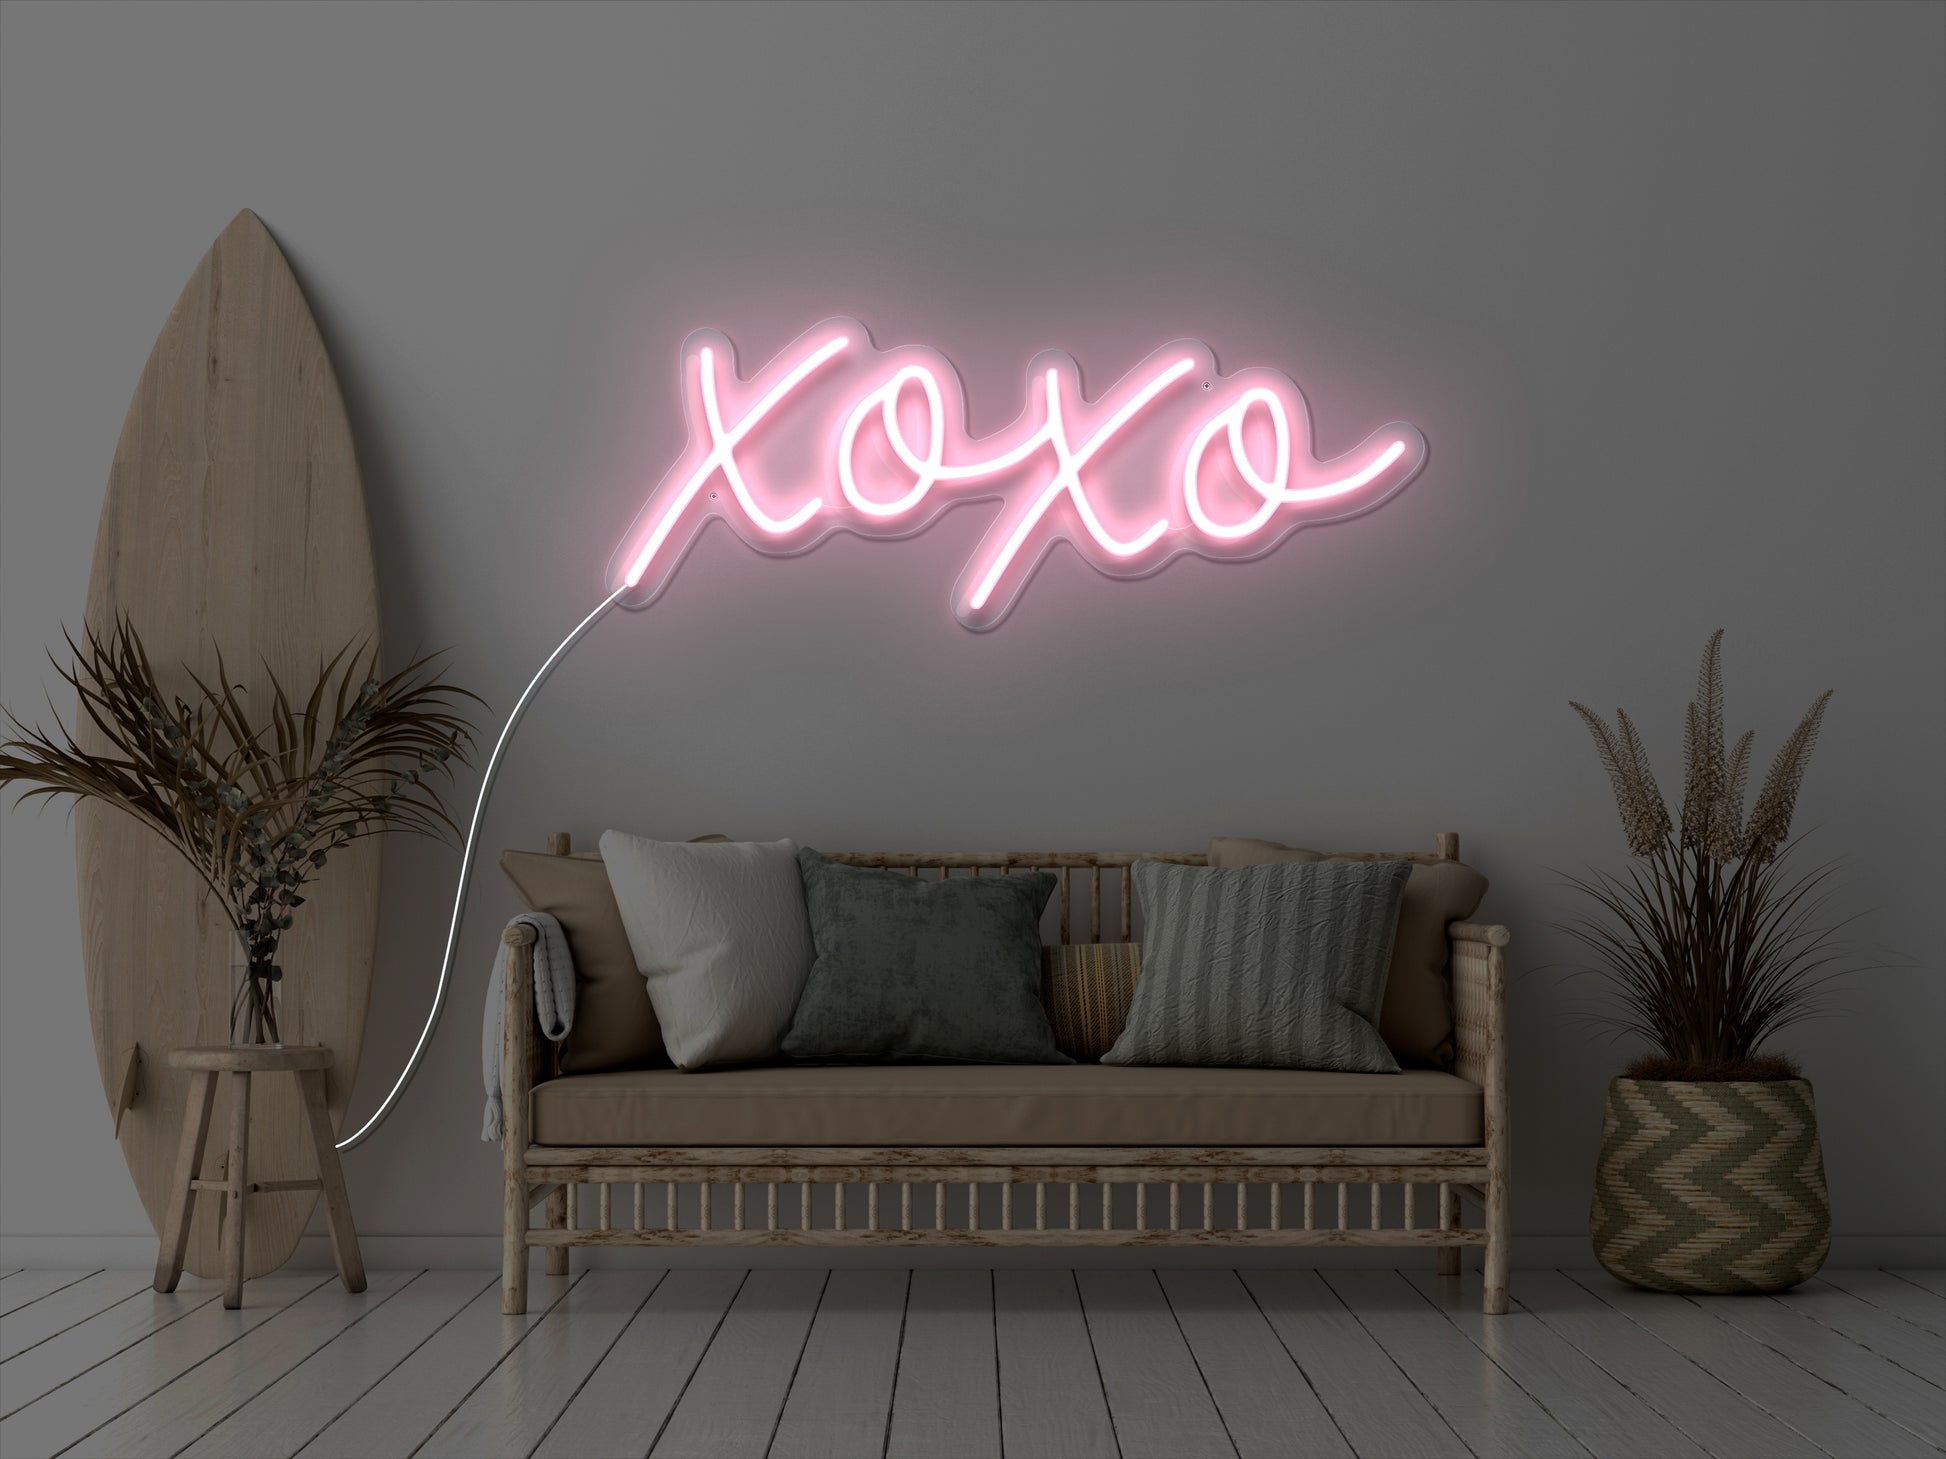 "A bright blue neon sign with the phrases "Kiss" and "Hug" written in bold letters, separated by a red heart symbol, illuminating a dimly lit room, perfect for a romantic or love-themed decoration